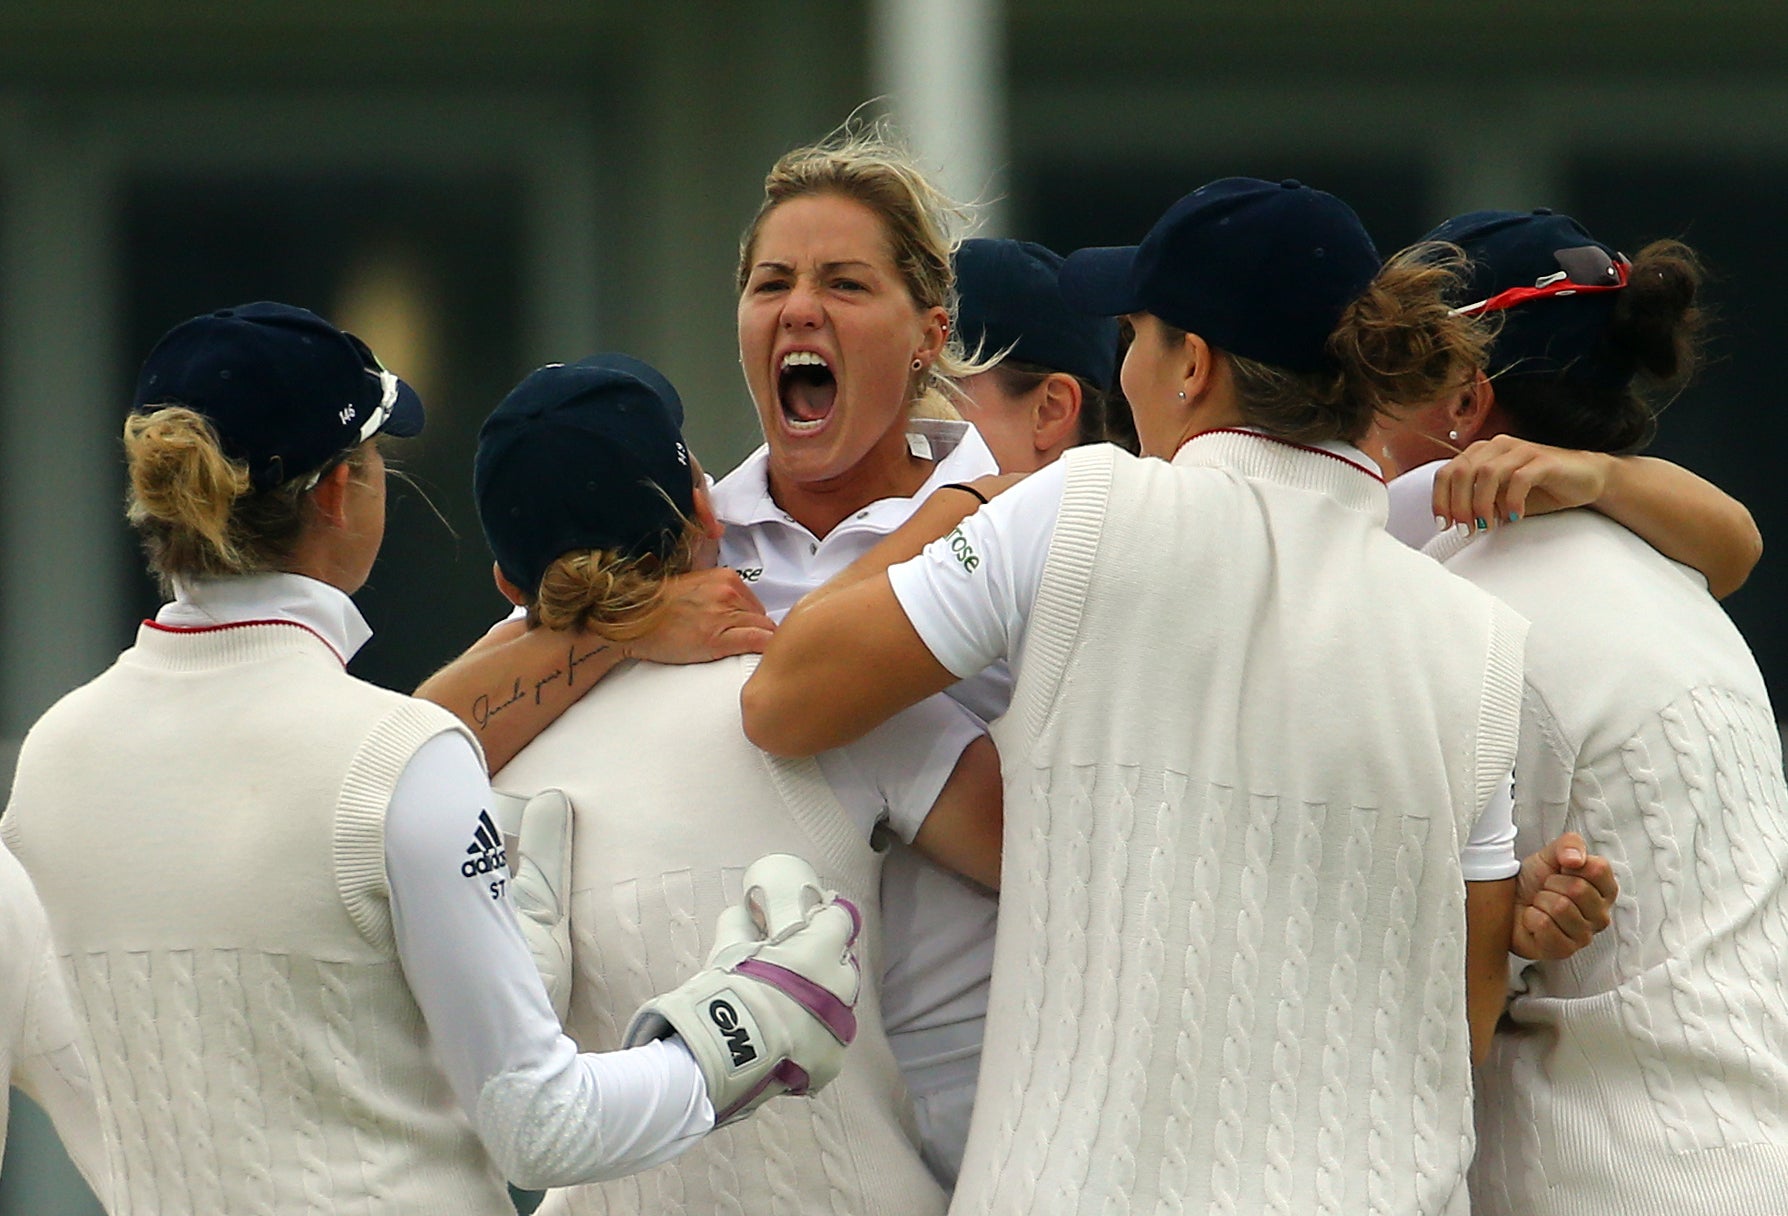 Katherine Brunt, centre, finishes as England Women’s third-highest Test wicket-taker with 51 dismissals (Gareth Fuller/PA)